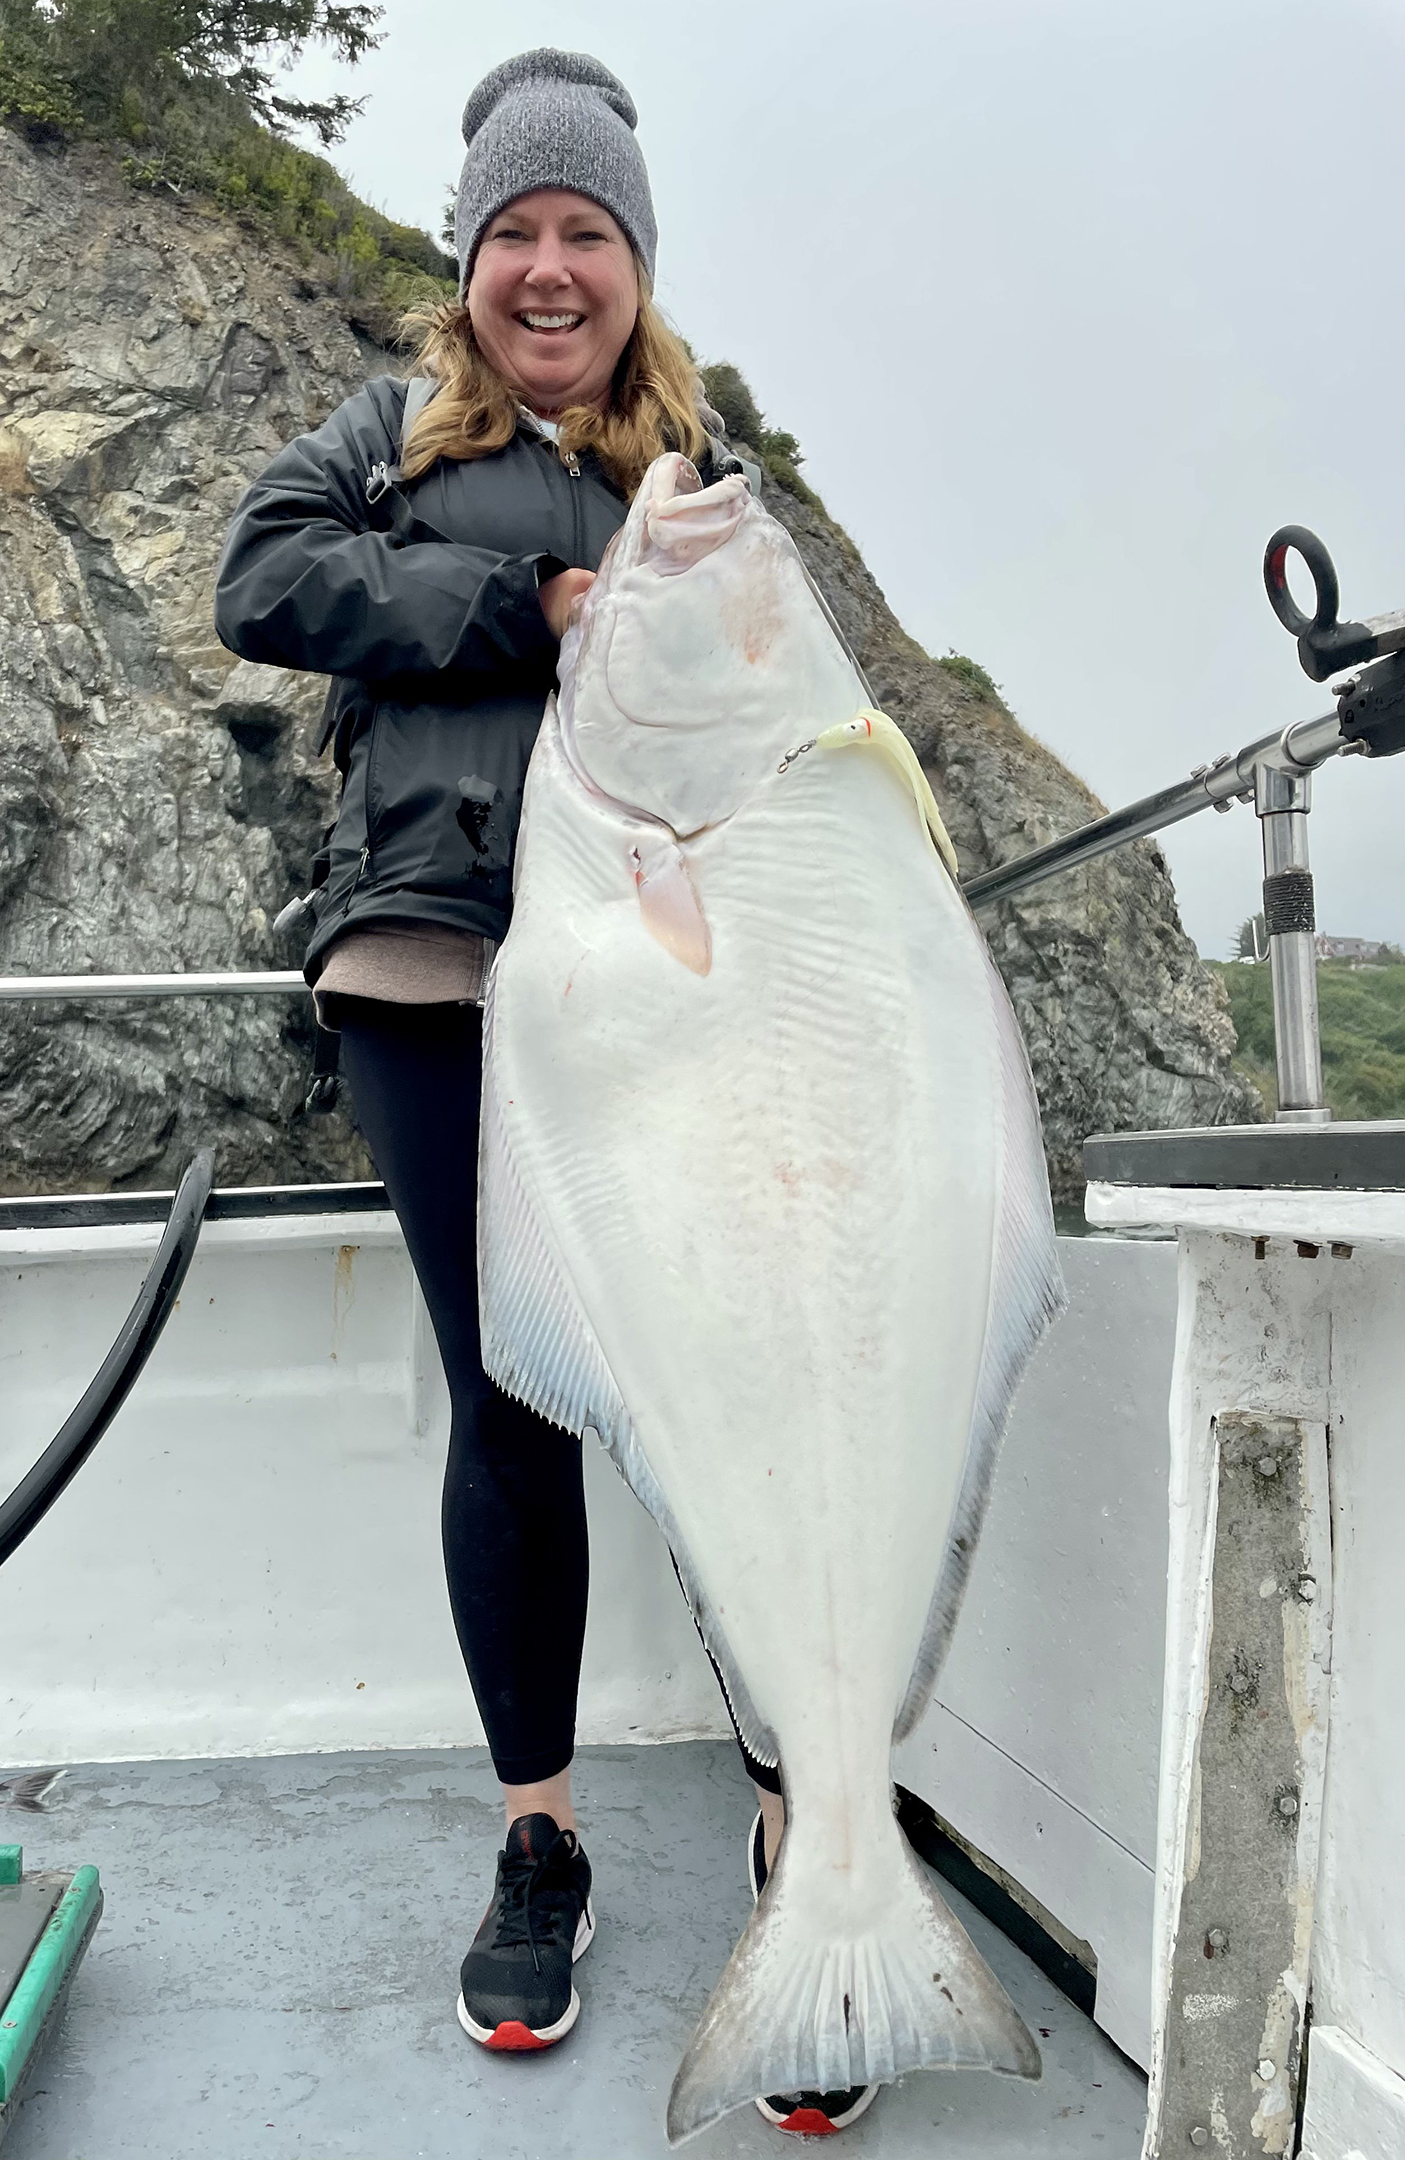 Using Gulp! for halibut (lots of pics)